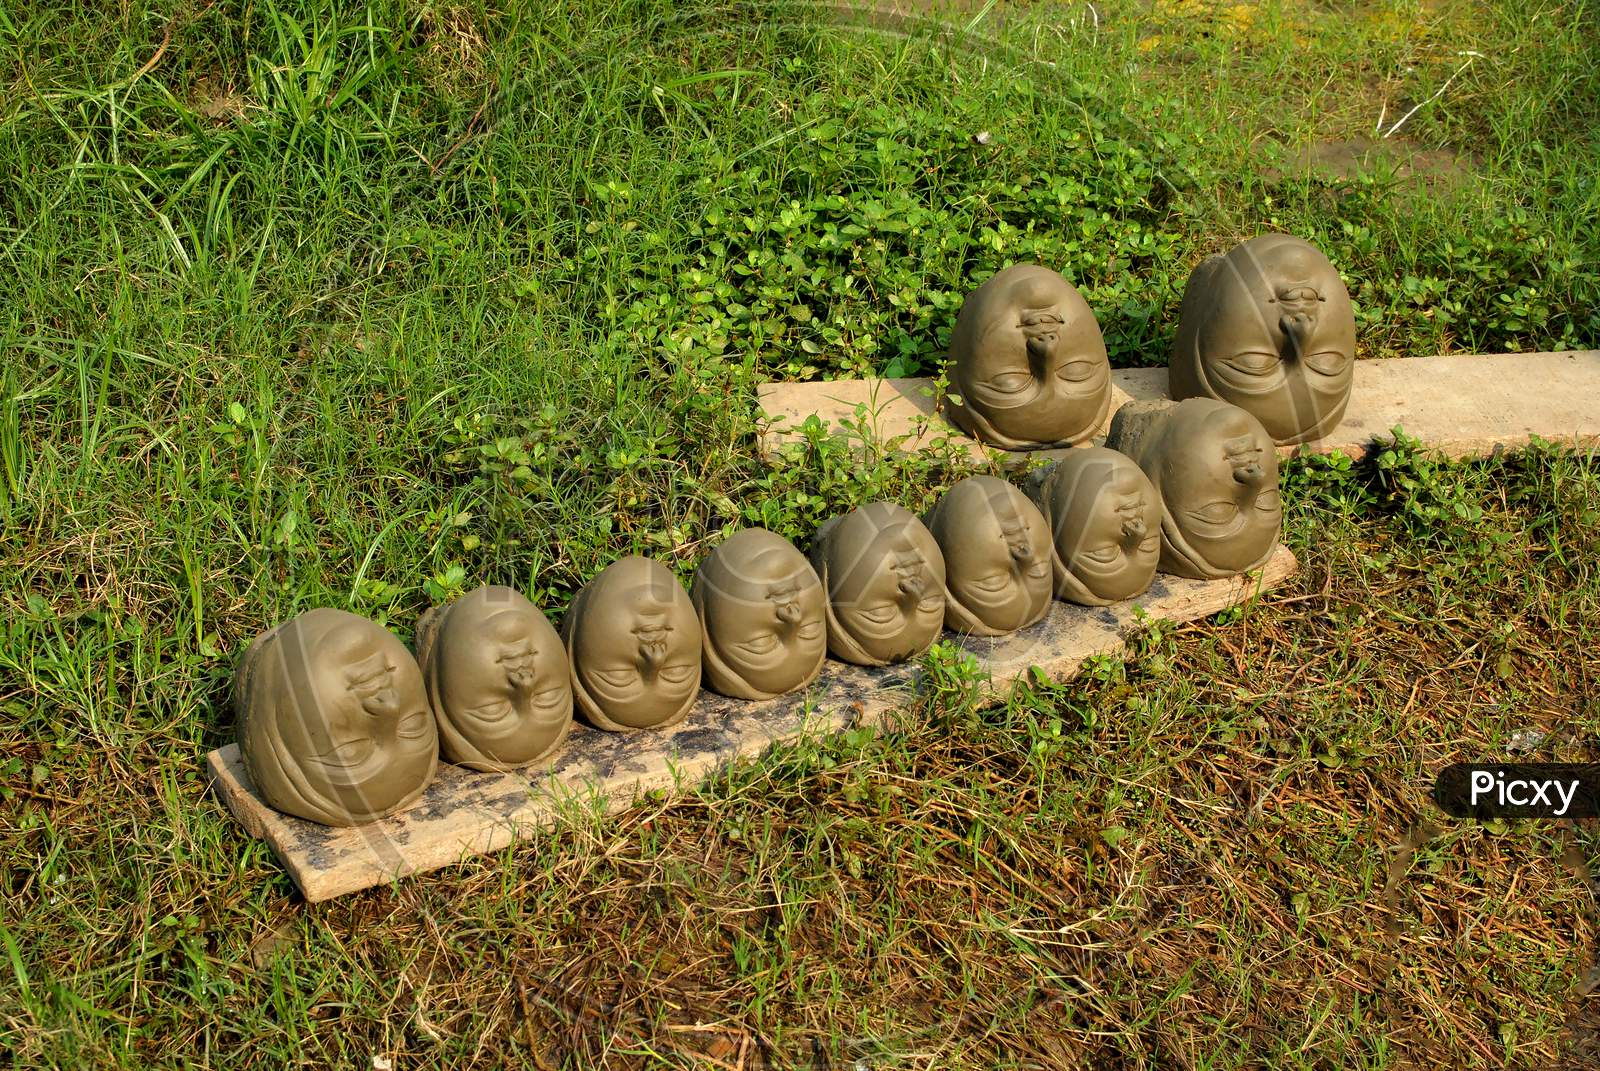 The heads made by clay are drying in Sun light.